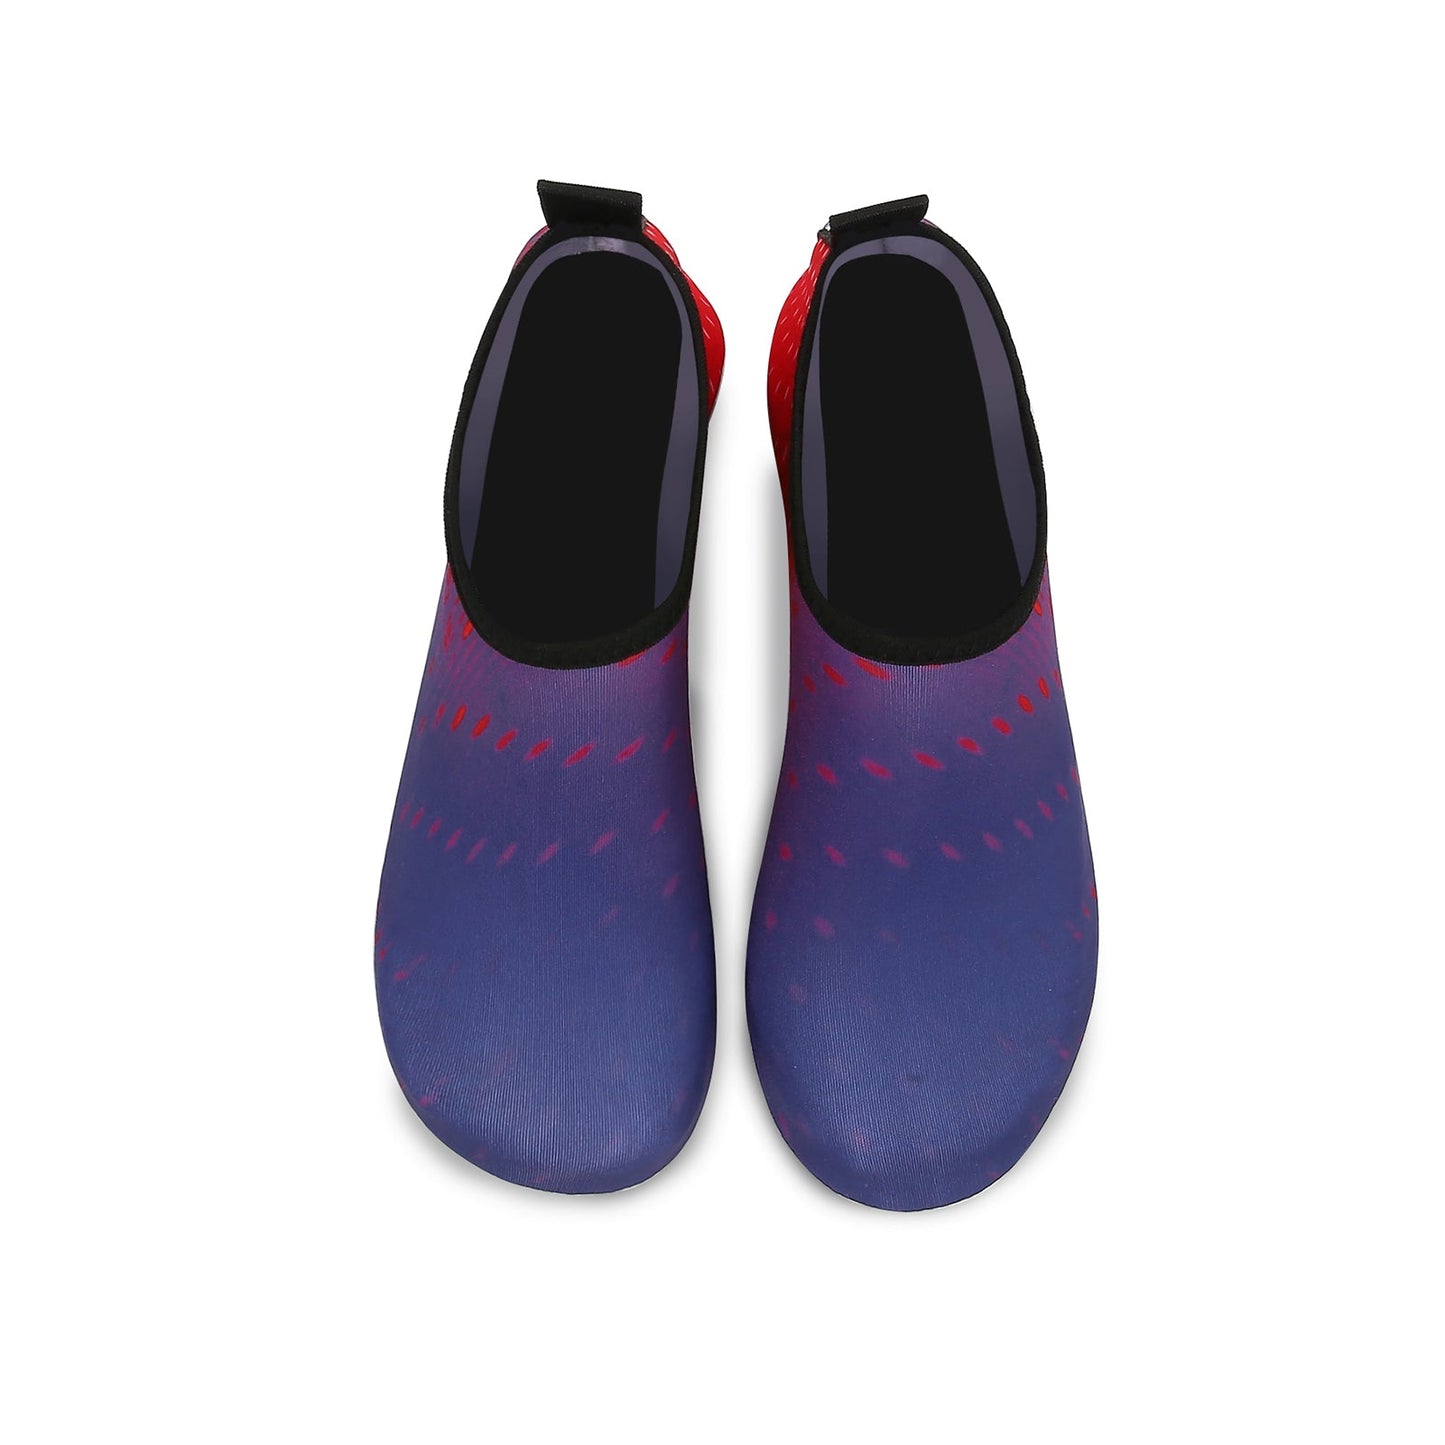 Men and Women a Slip On Barefoot Quick-Dry Beach Aqua Yoga Water Shoes (Meteor/Purple Red)